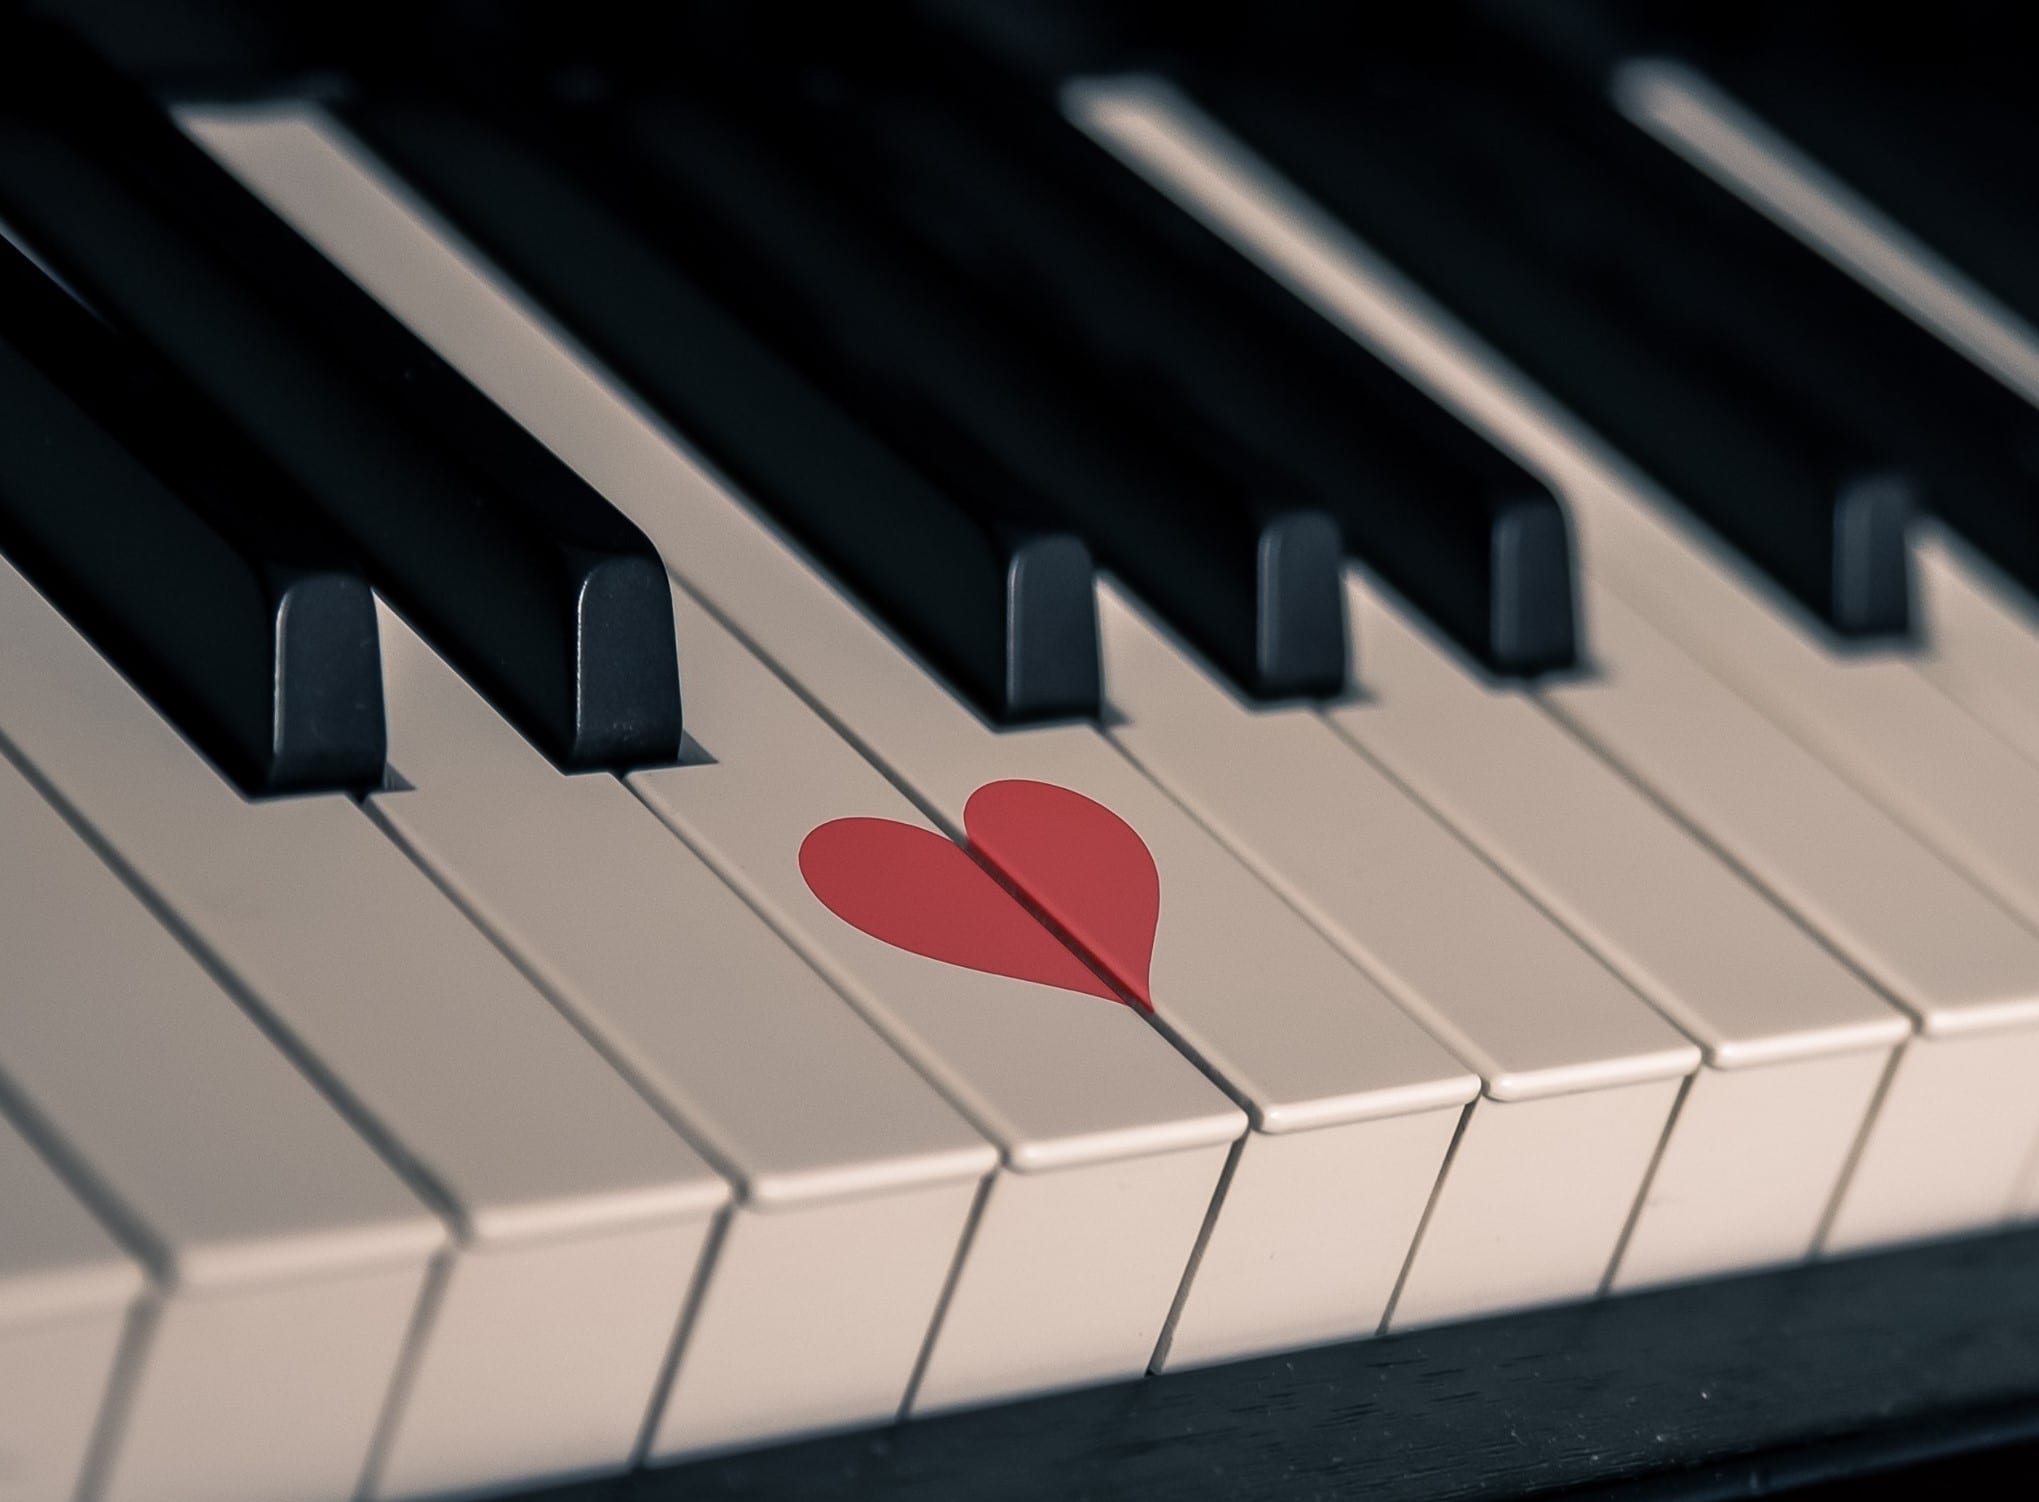 A small red heart painted on the piano keys